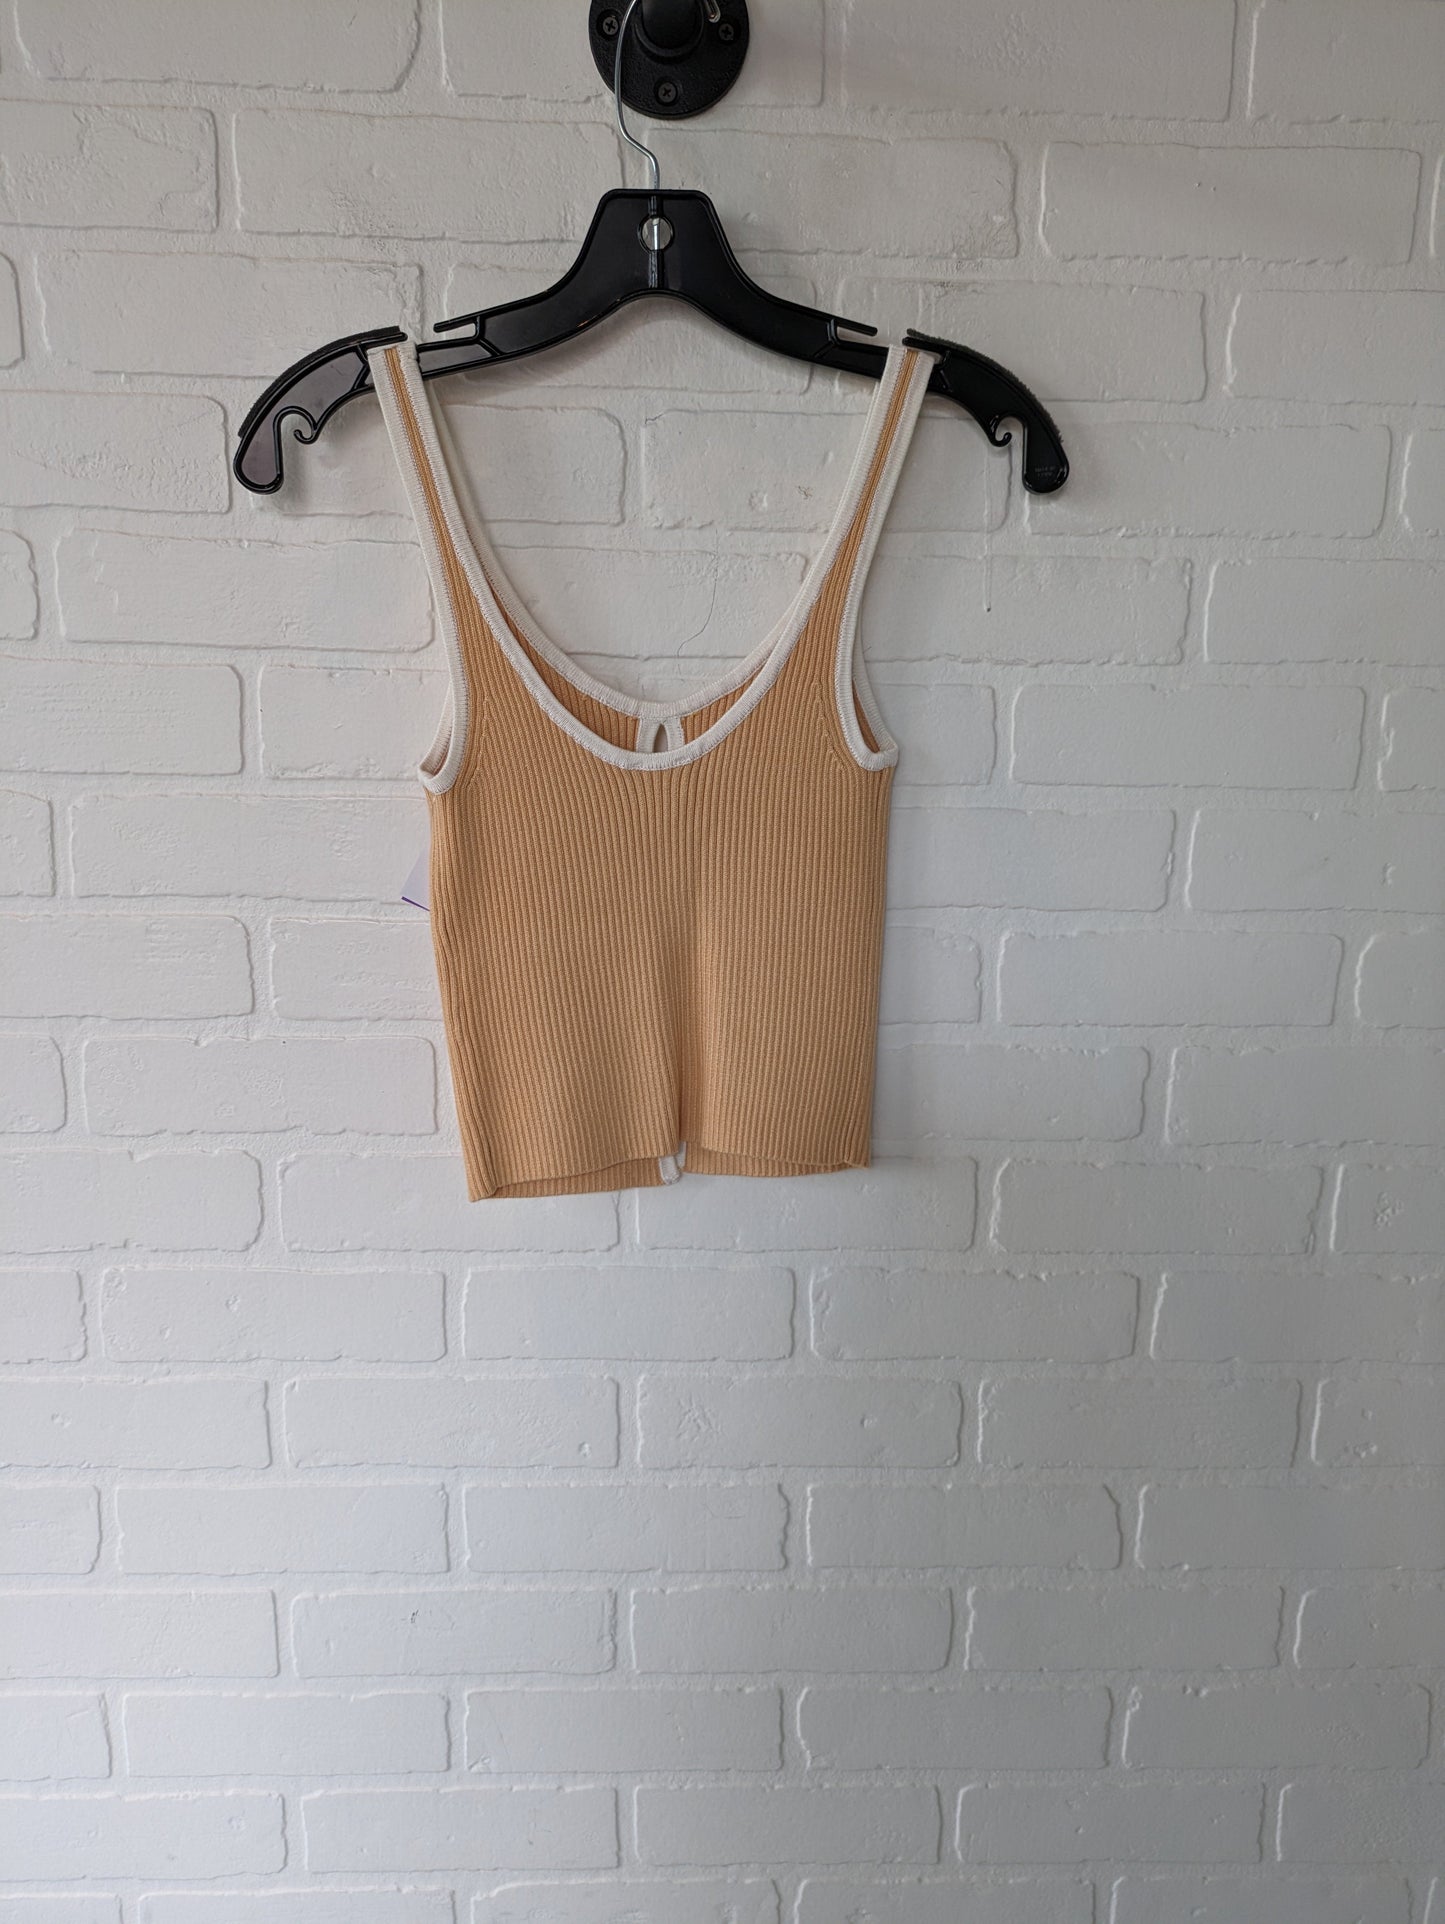 Yellow Top Cami Abercrombie And Fitch, Size Xs